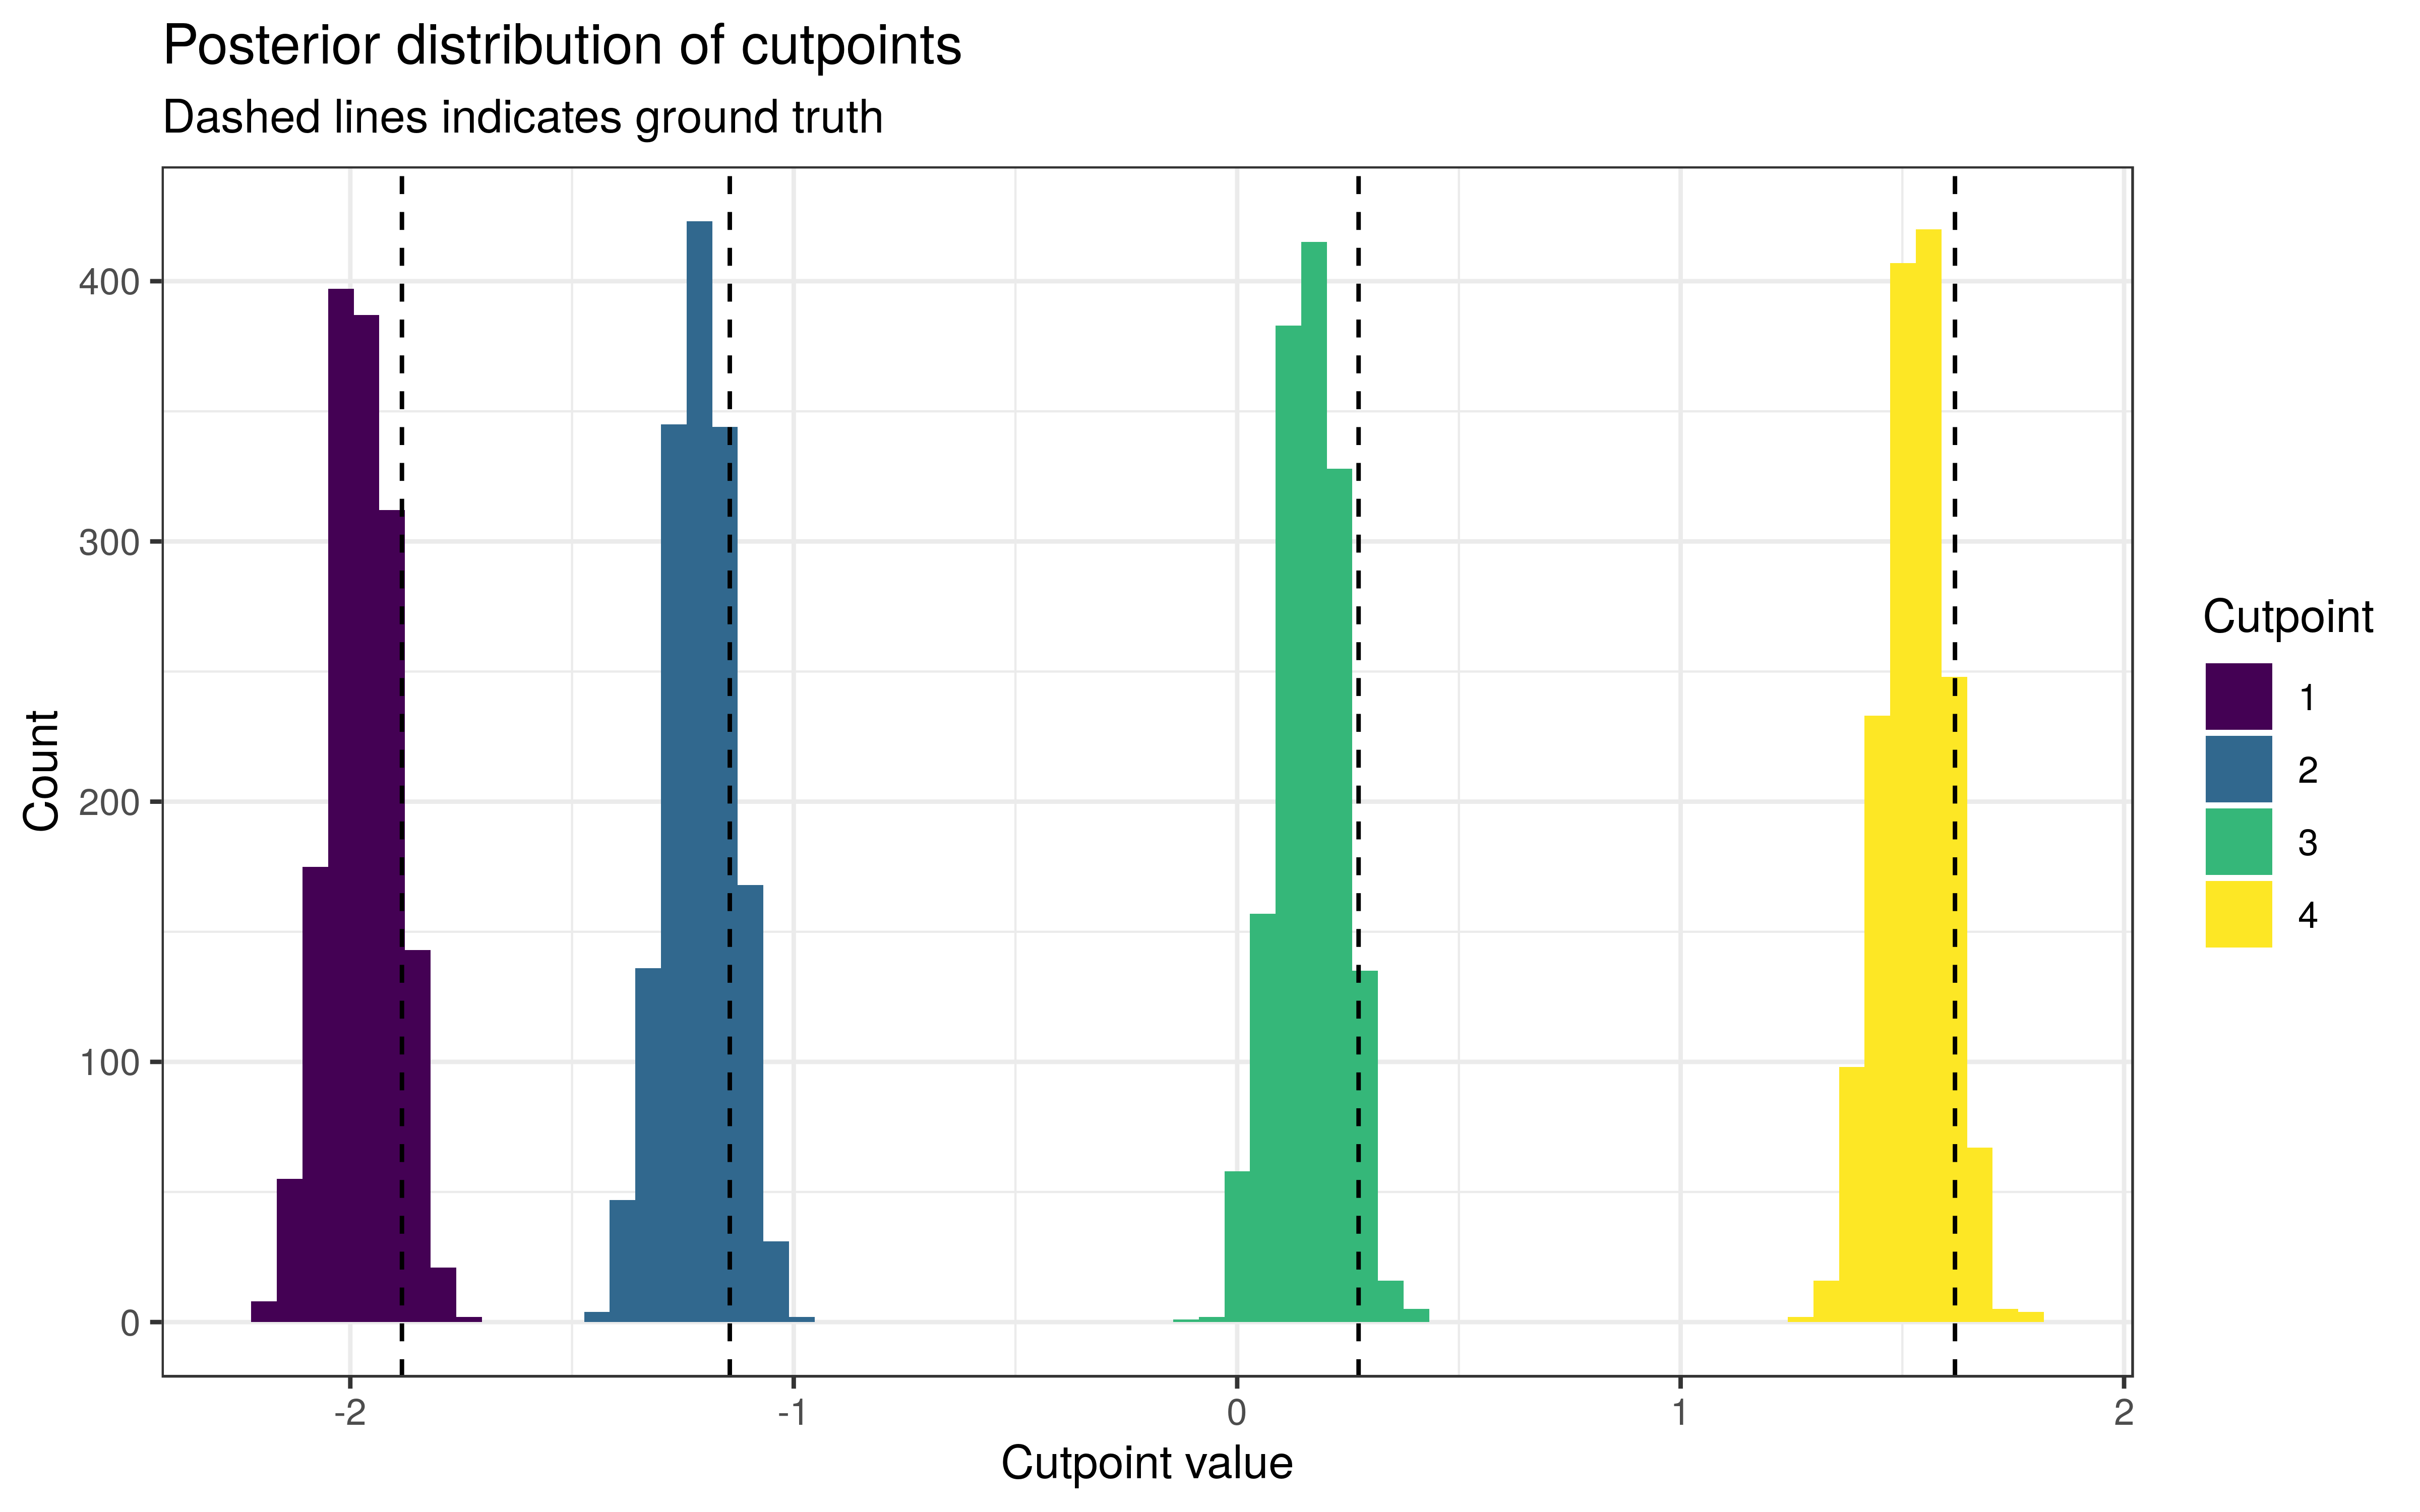 Posterior distribution of cutpoints using the mapped model